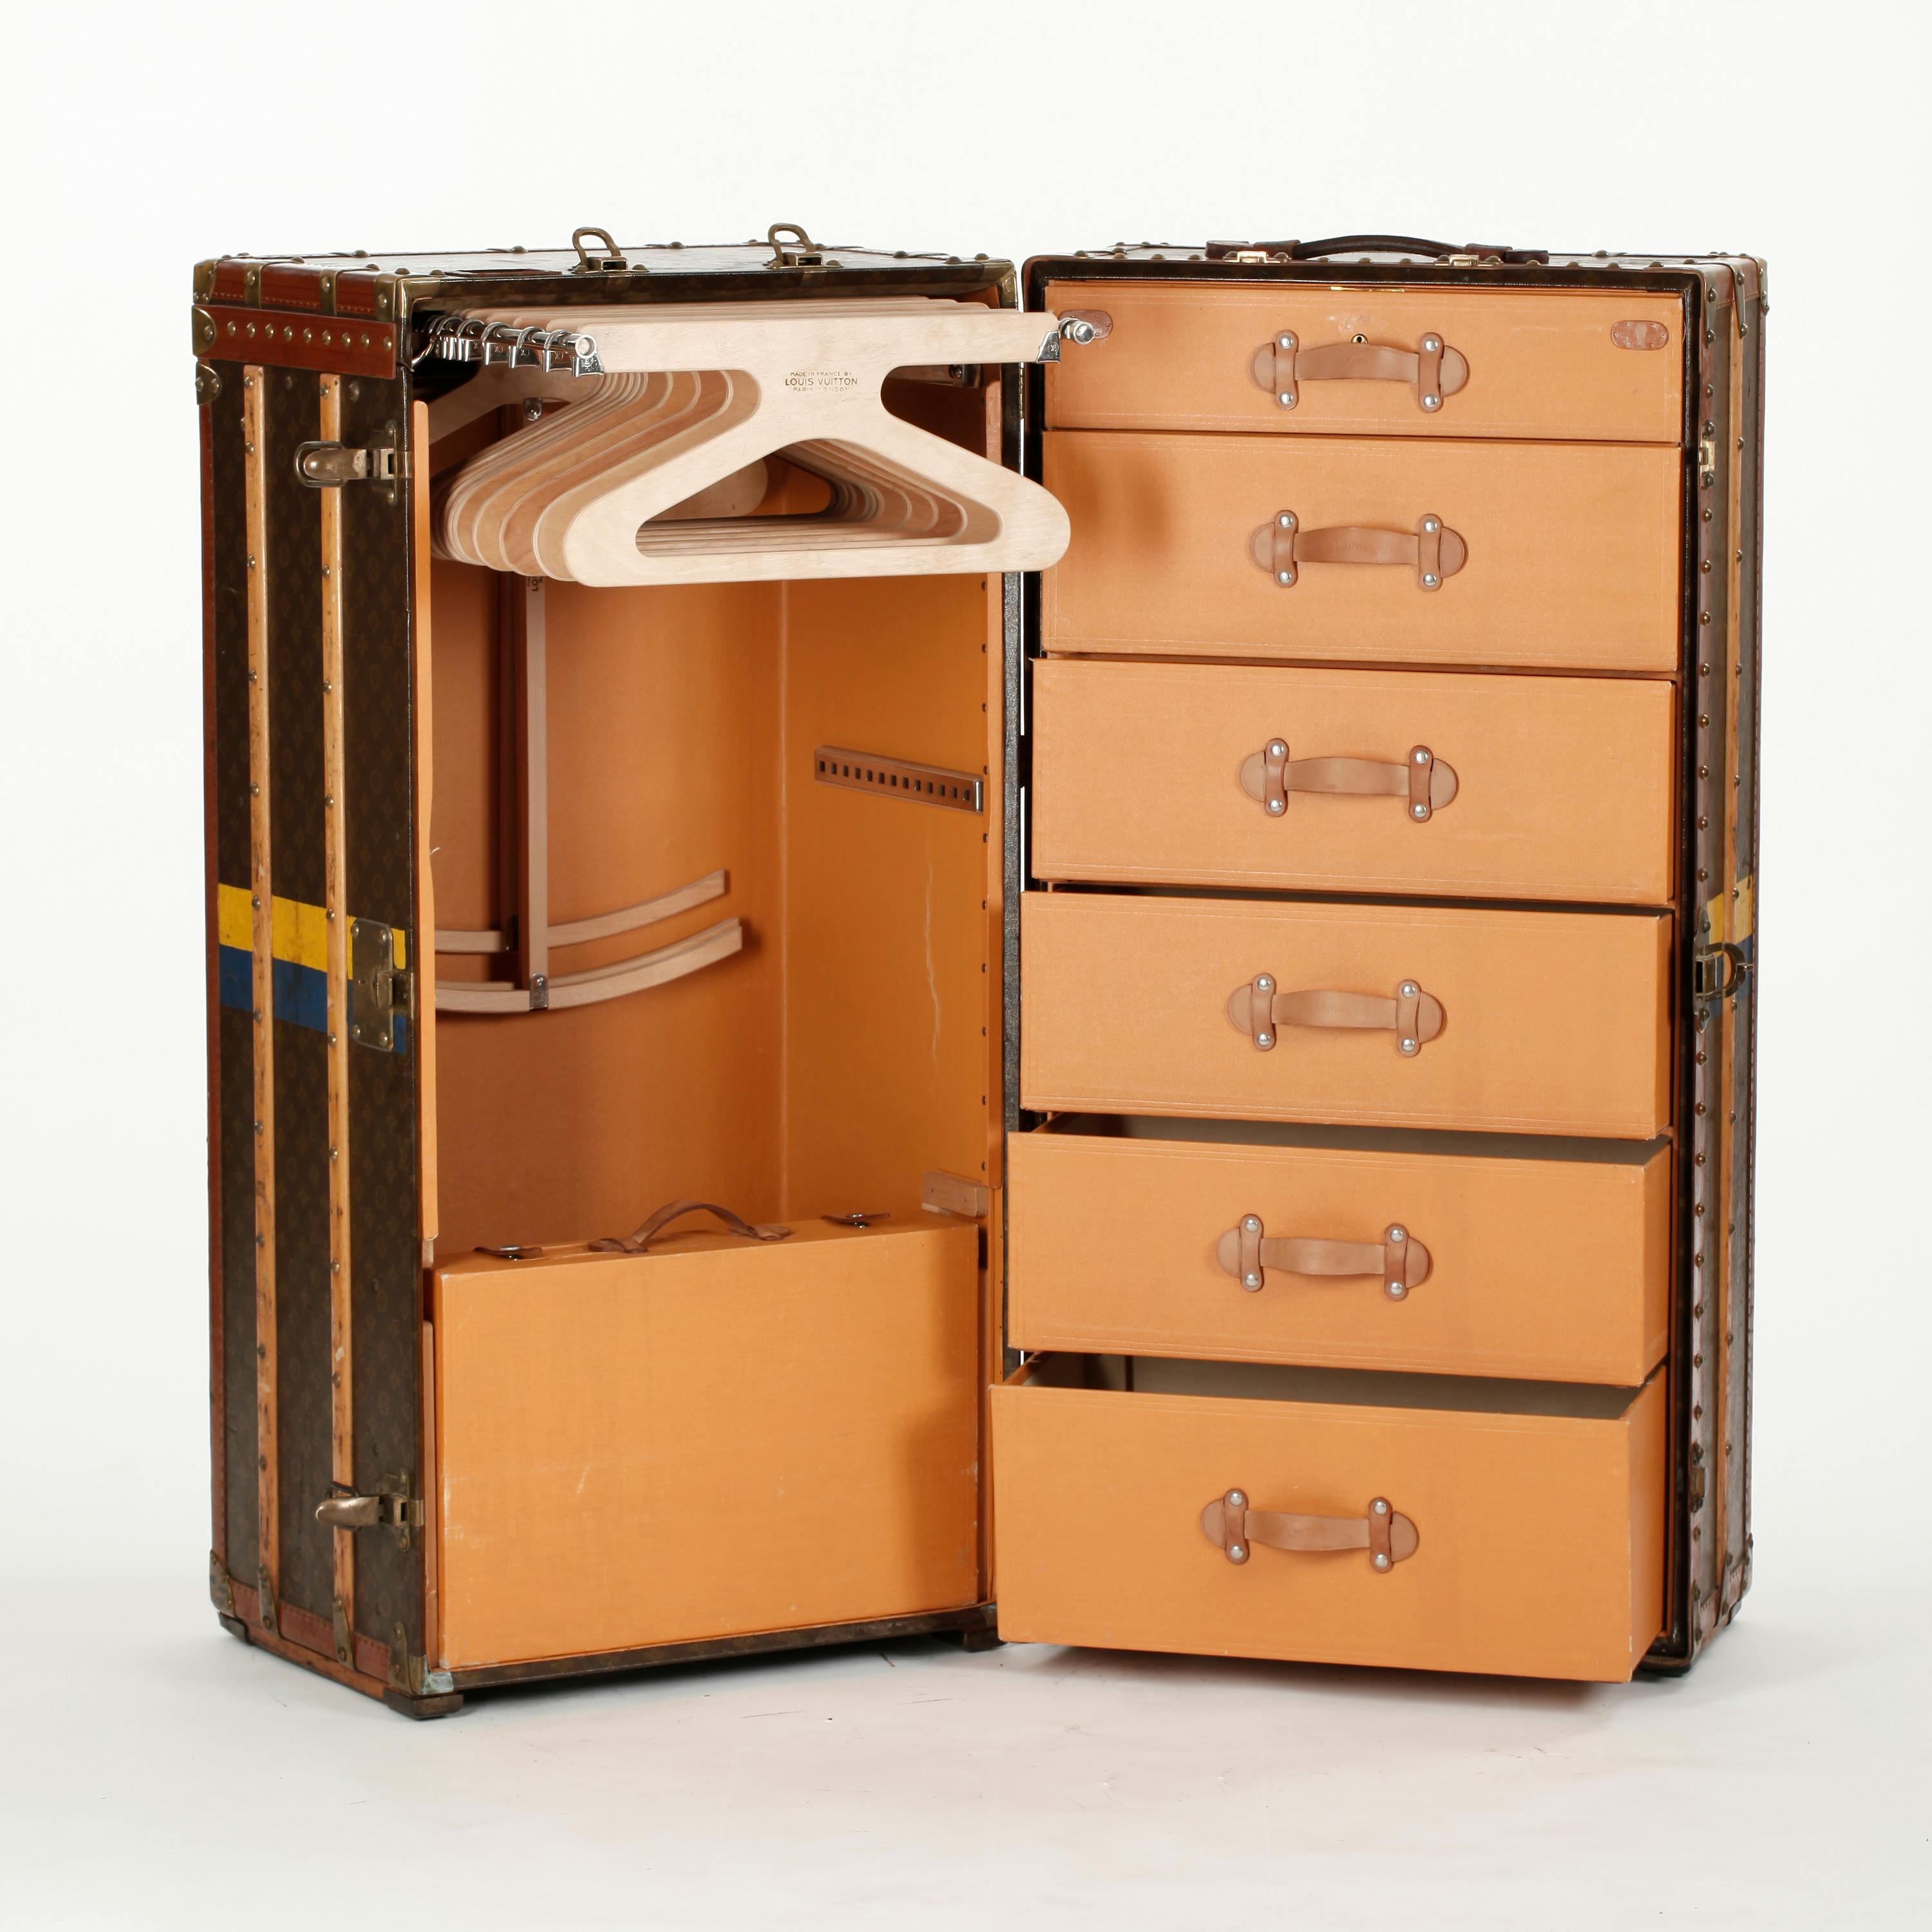 Vintage Luggage & Trunks: Where to Begin